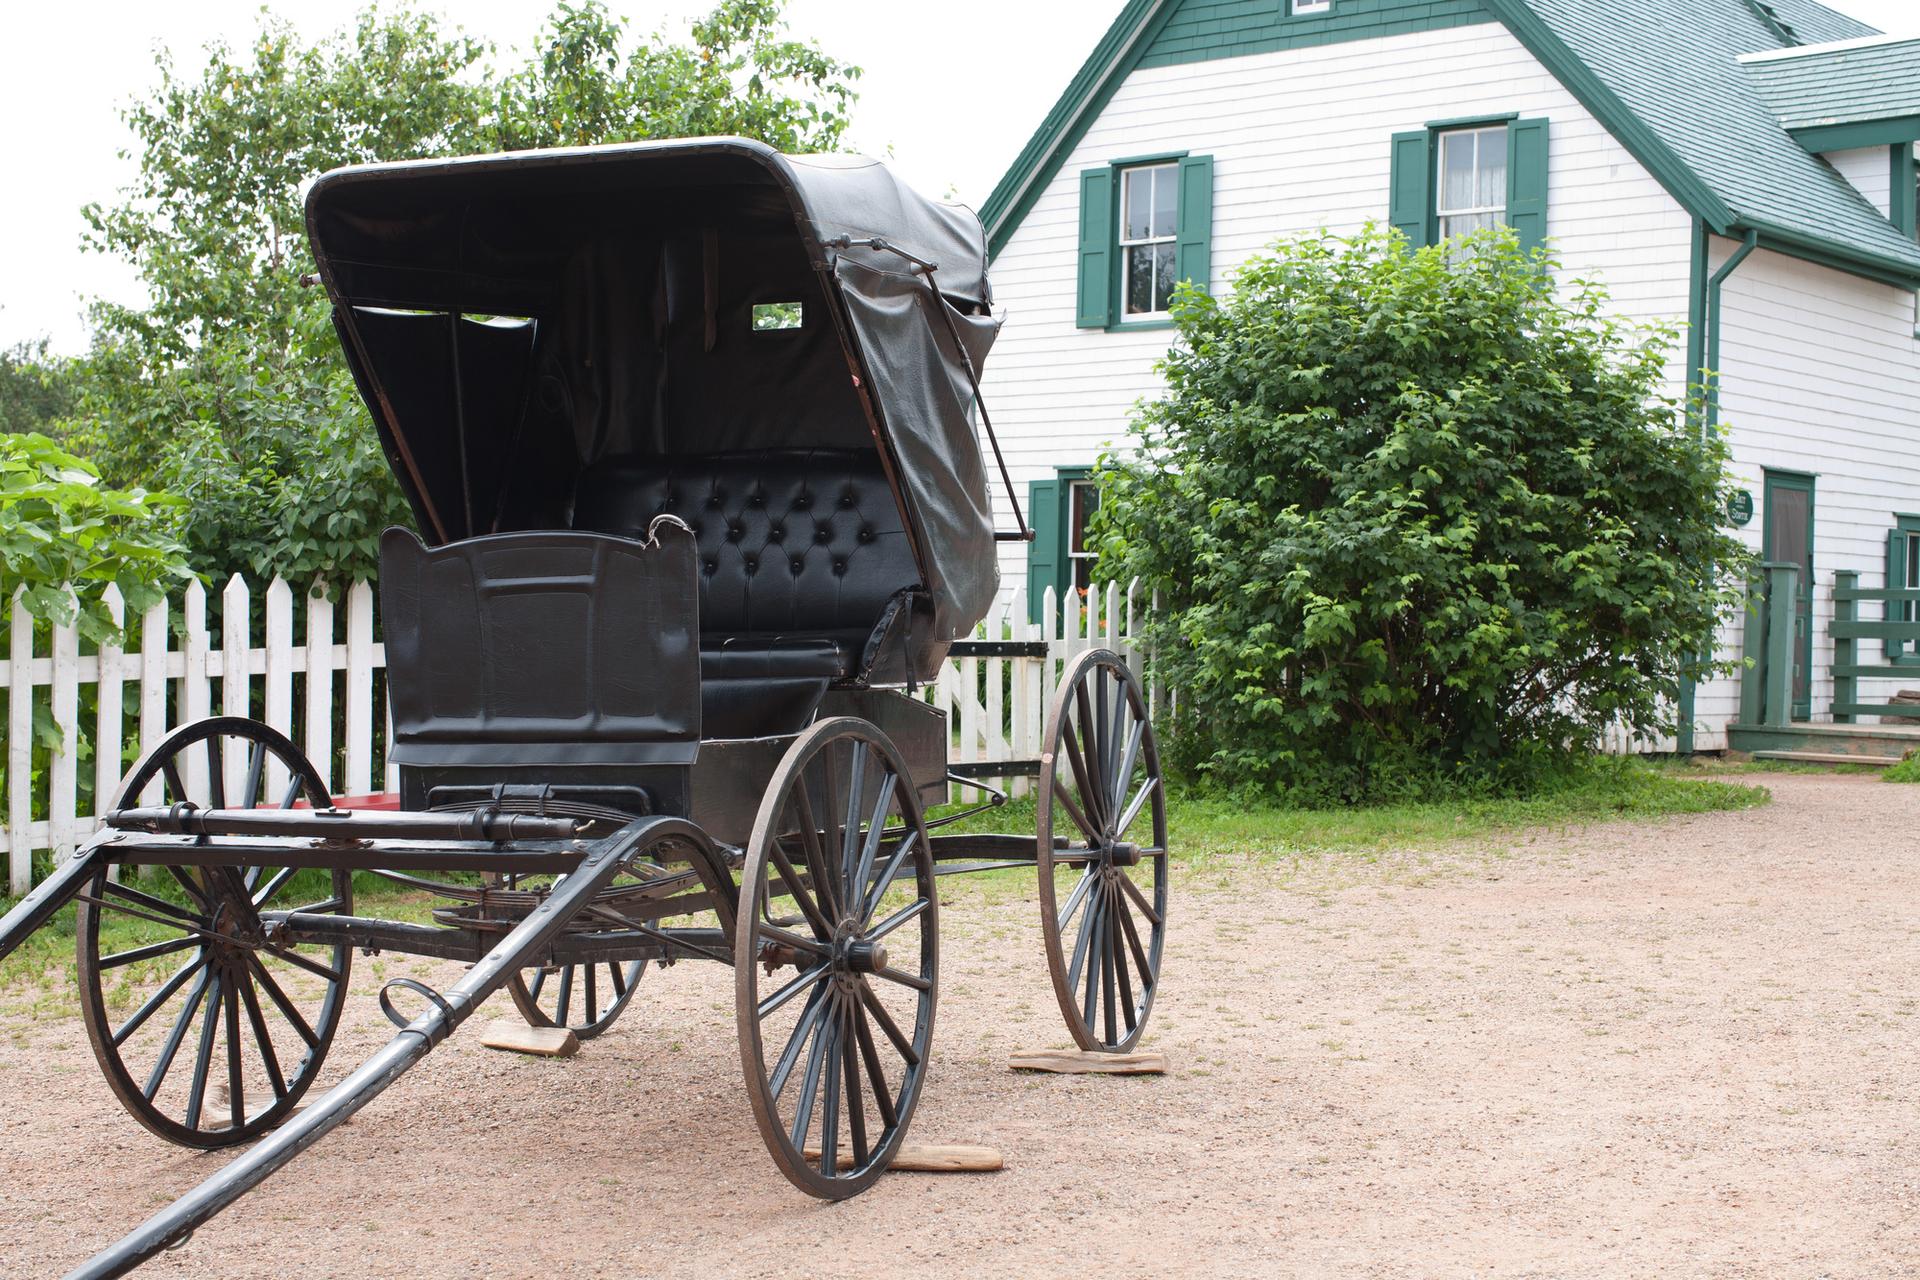 Anne of Green Gables Heritage Place recreates the late 1800s